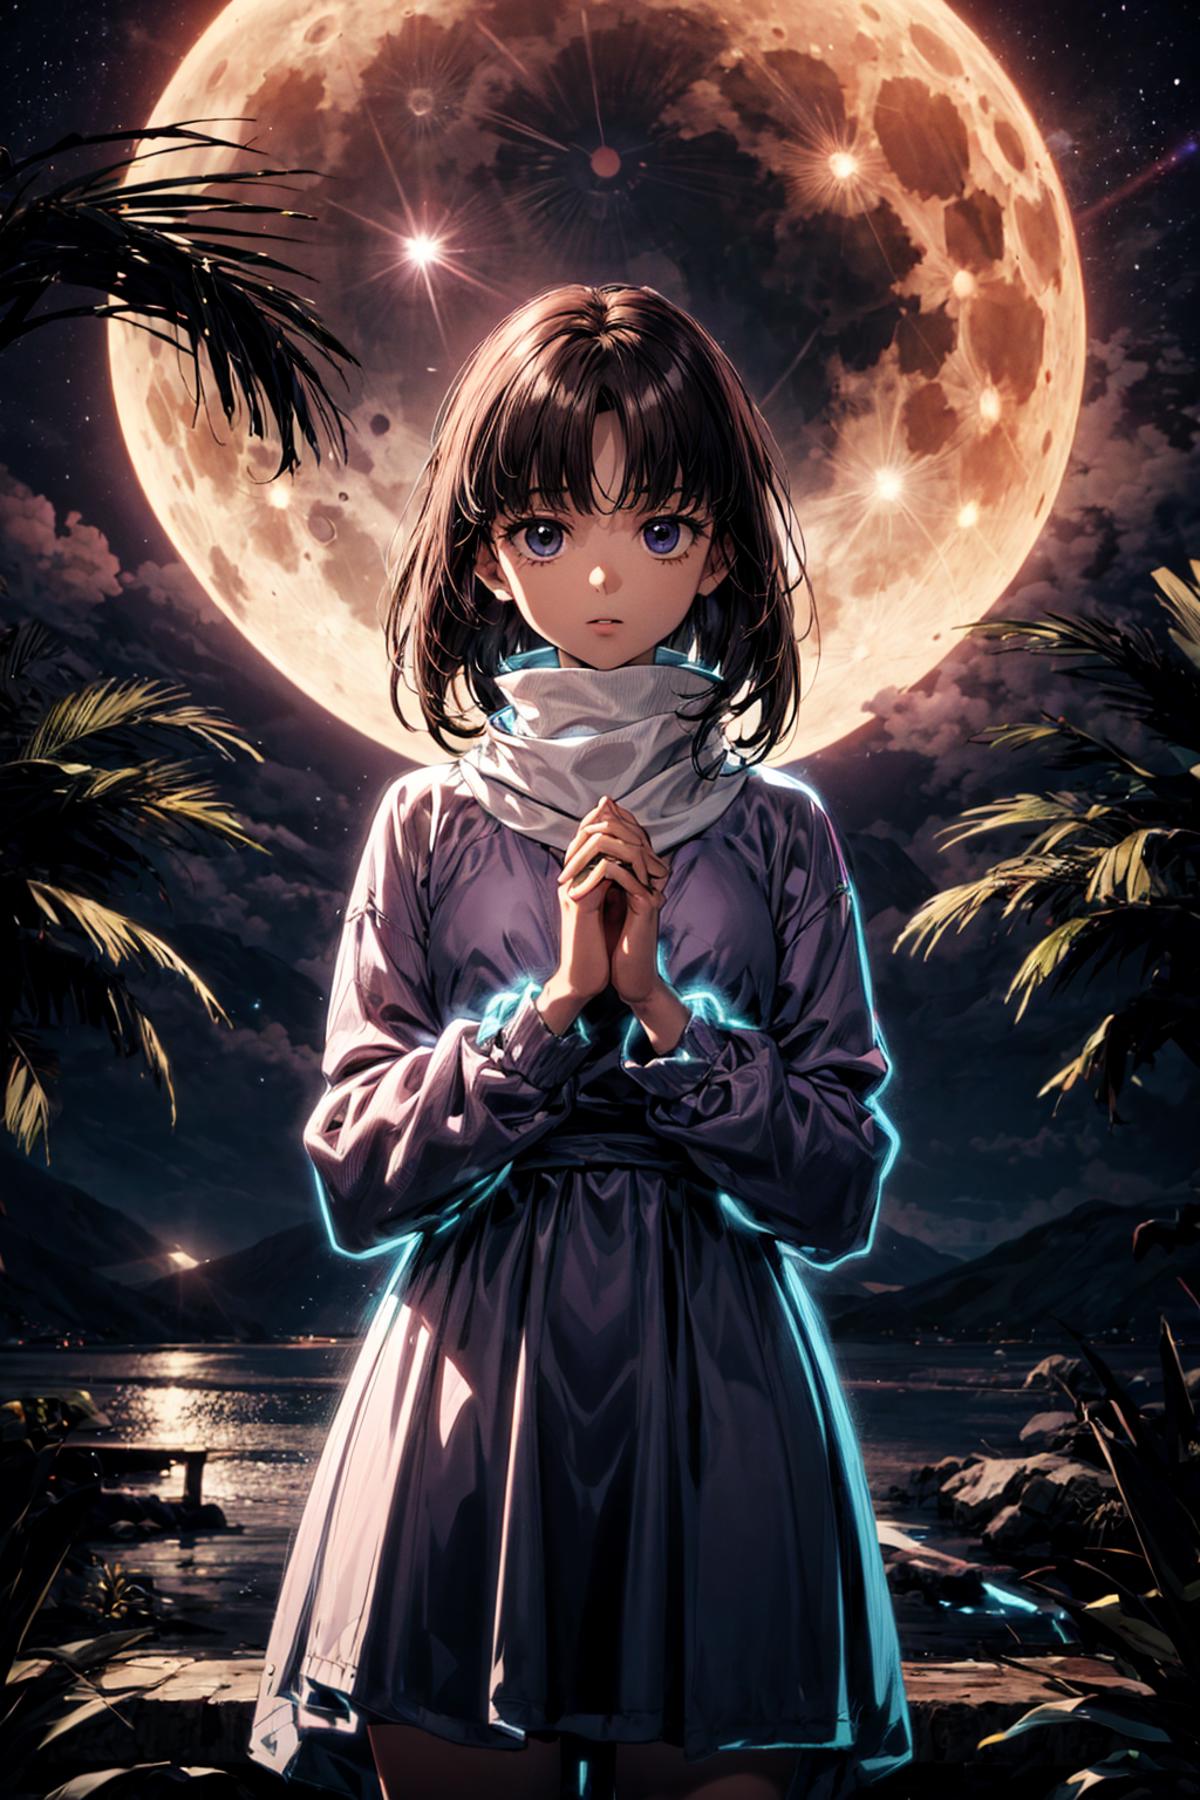 An Anime Character Praying Under a Moonlit Sky